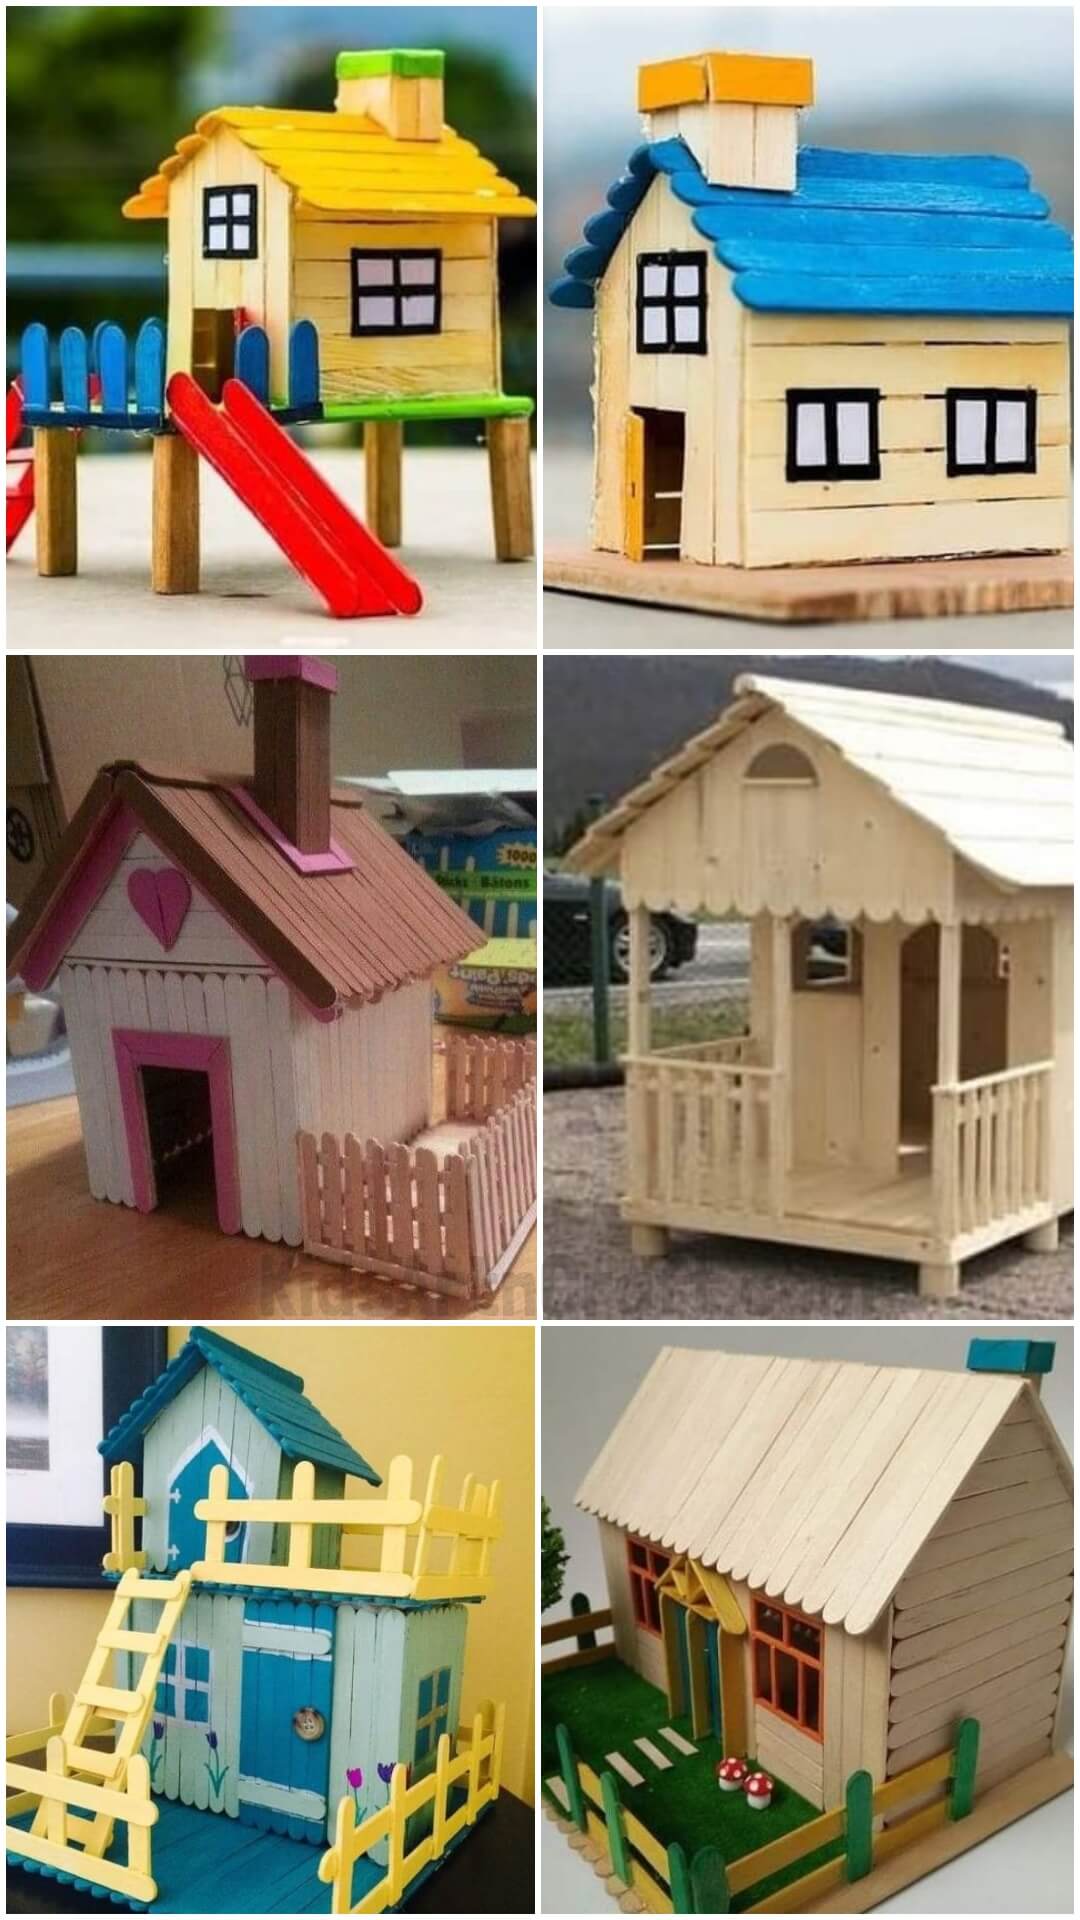 DIY Popsicle Stick Houses - Make Your Own Home